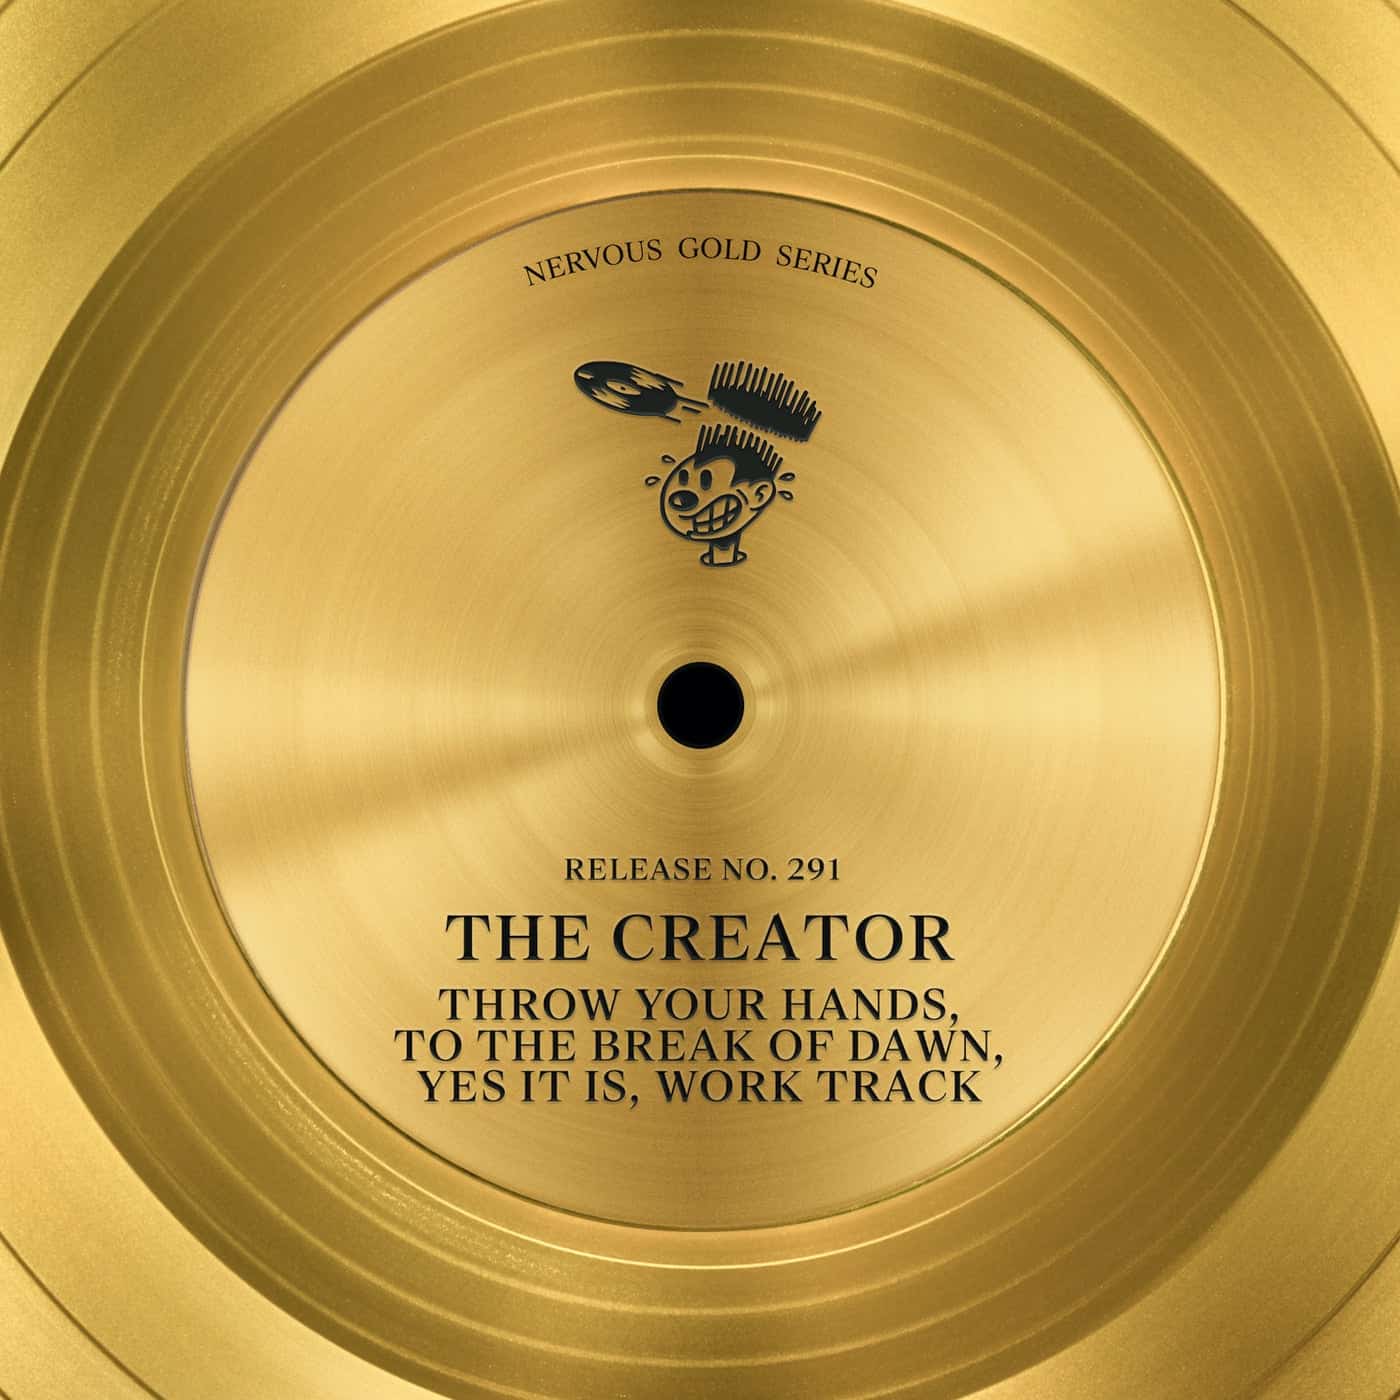 Download The Creator - Throw Your Hands, To The Break of Dawn, Yes It Is, Work Track on Electrobuzz